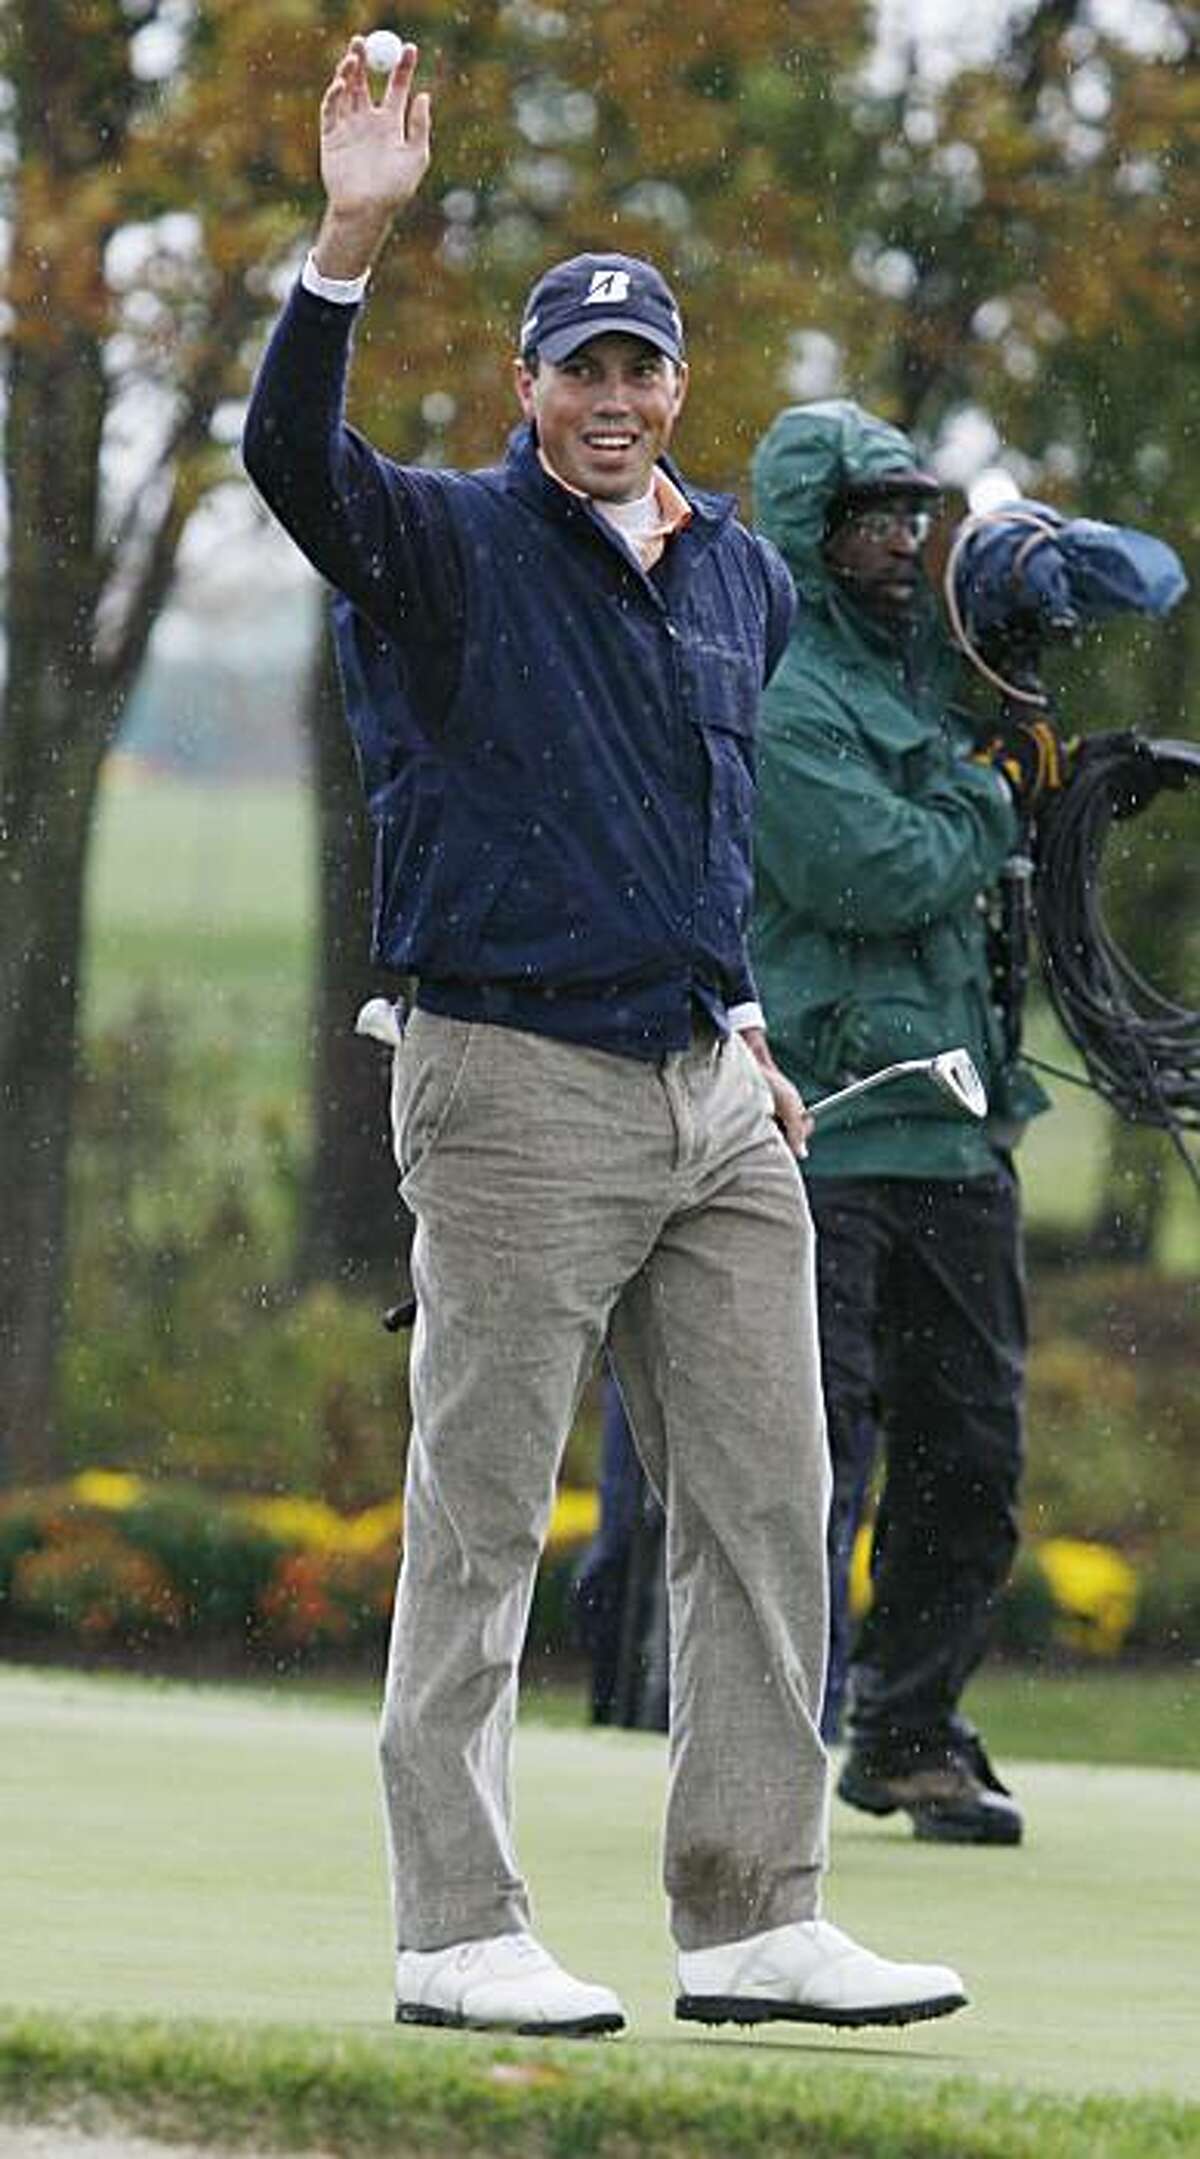 Matt Kuchar, of Atlanta, Ga., reacts after making the putt on the 13th hole during a sudden death round of the PGA golf Turning Stone Resort Championship in Verona, N.Y., Monday, Oct. 5, 2009. Kuchar won the tournament on the sixth hole of a sudden-death playoff against Vaughn Taylor.